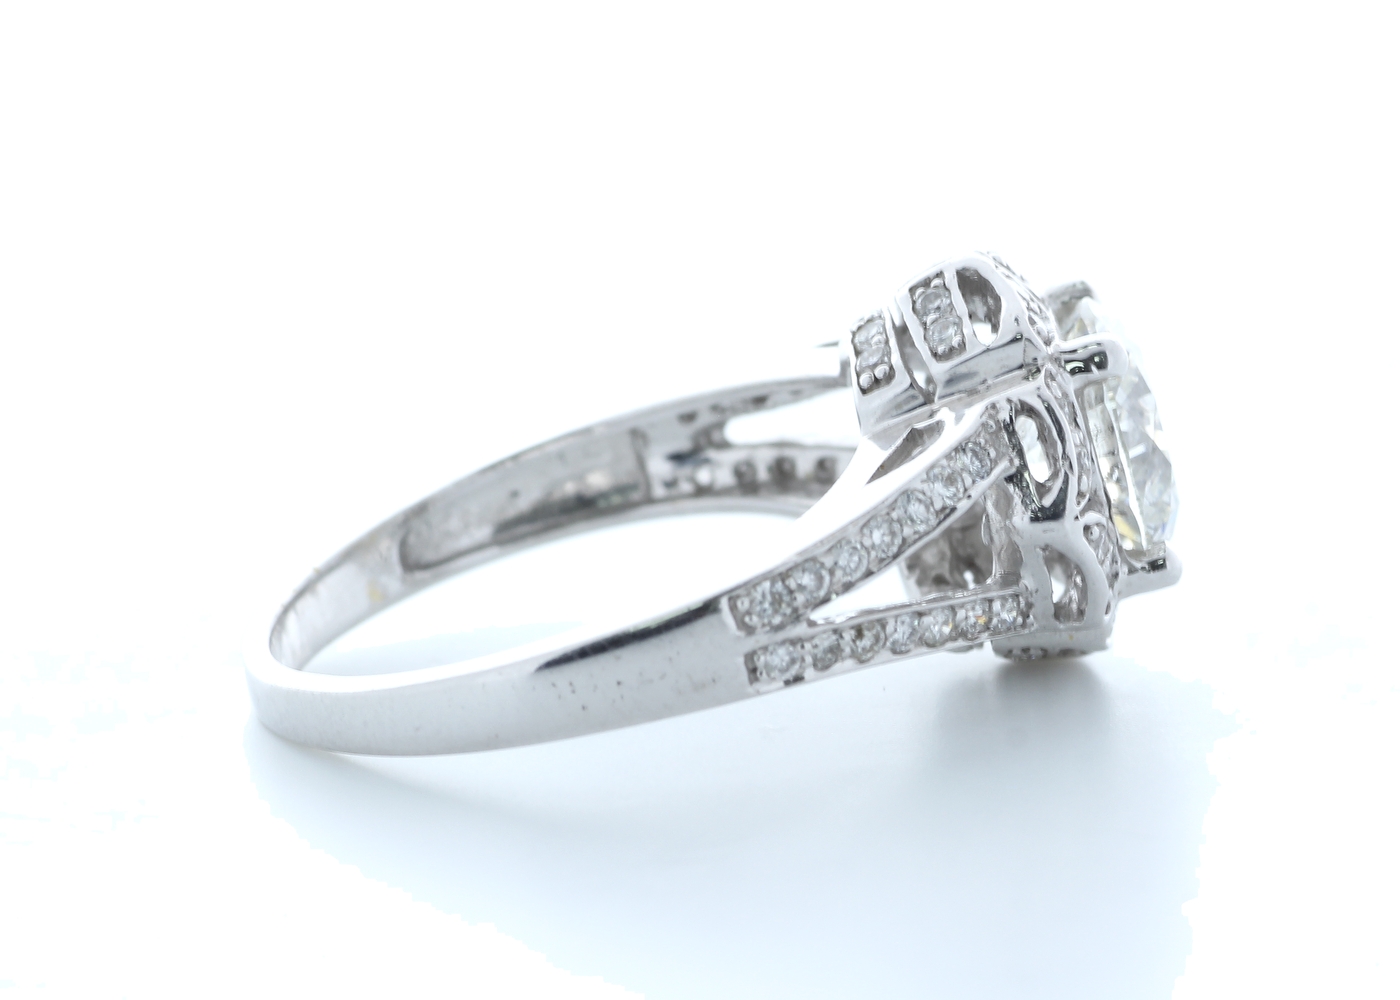 18ct White Gold Single Stone With Halo Setting Ring 2.06 (1.66) Carats - Image 4 of 5